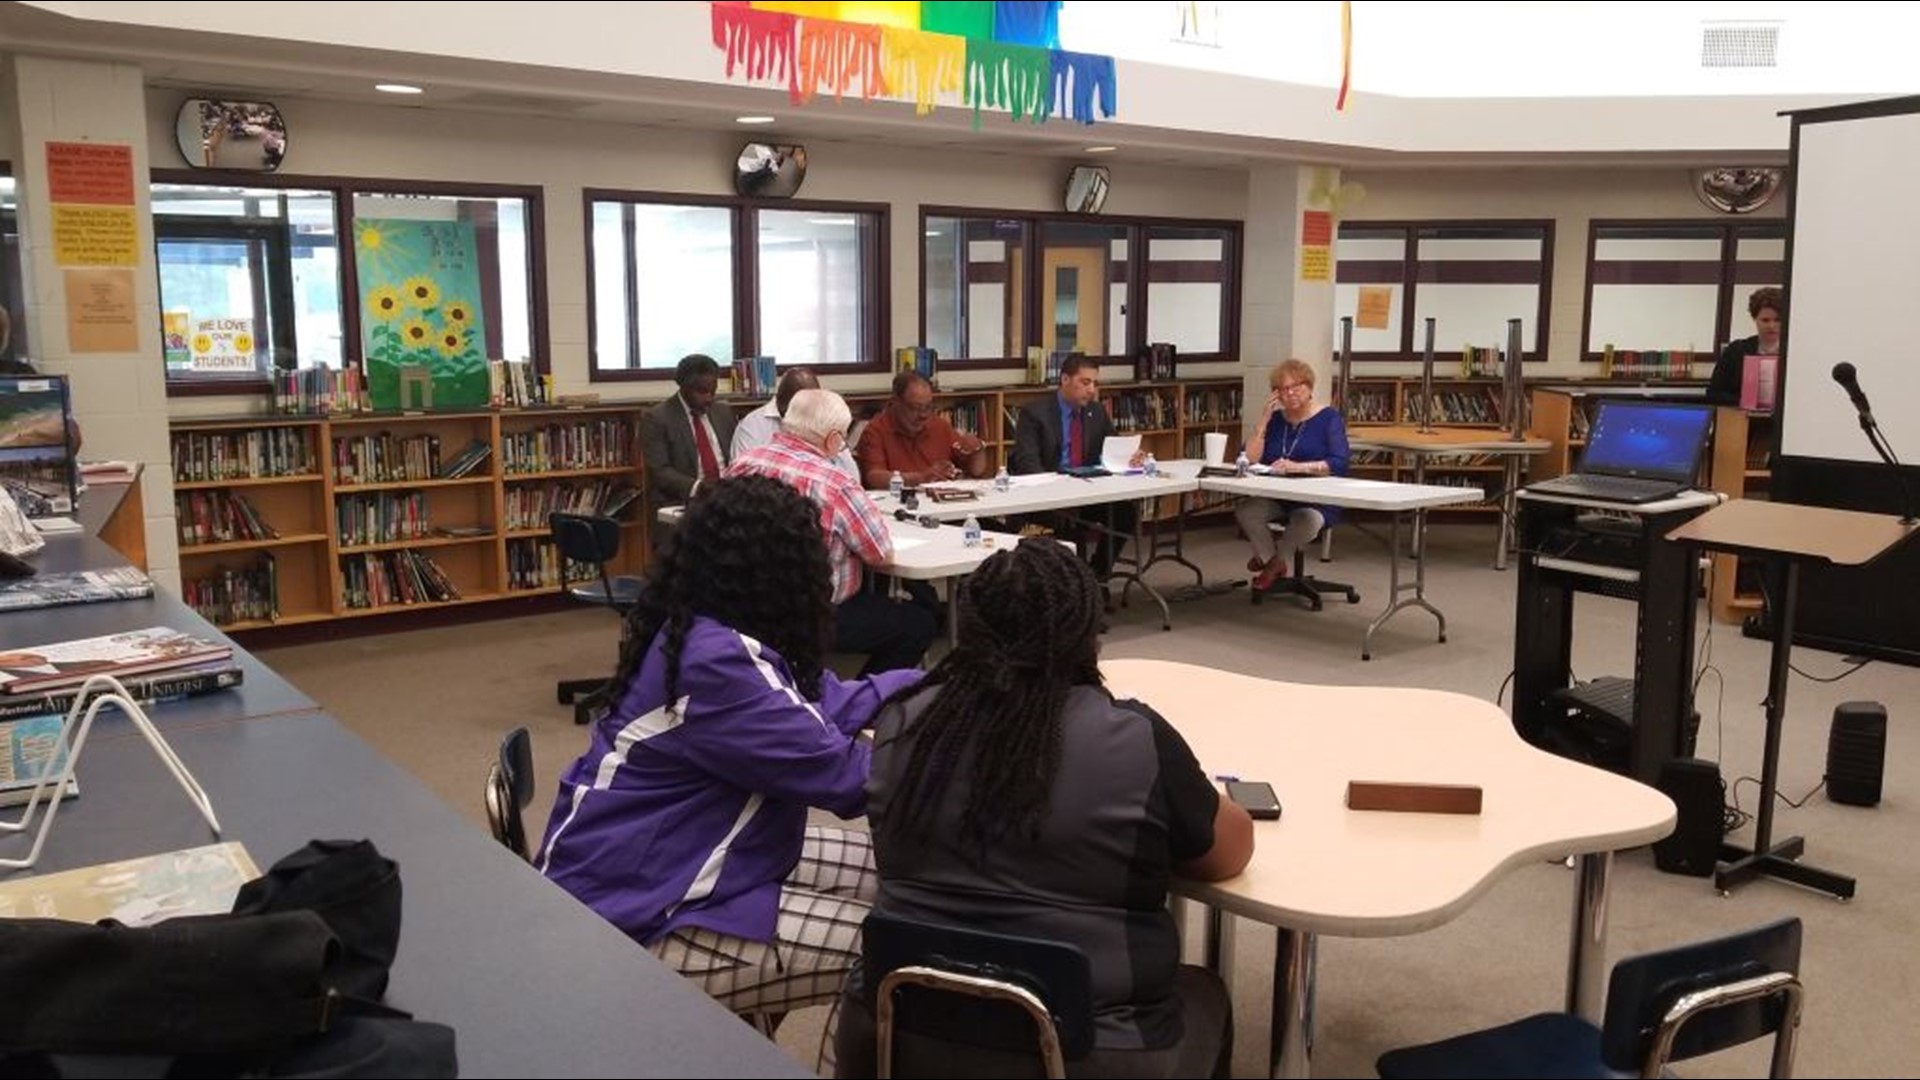 Board members said the superintendent would be placed on administrative leave during an investigation into his performance and alleged misconduct.